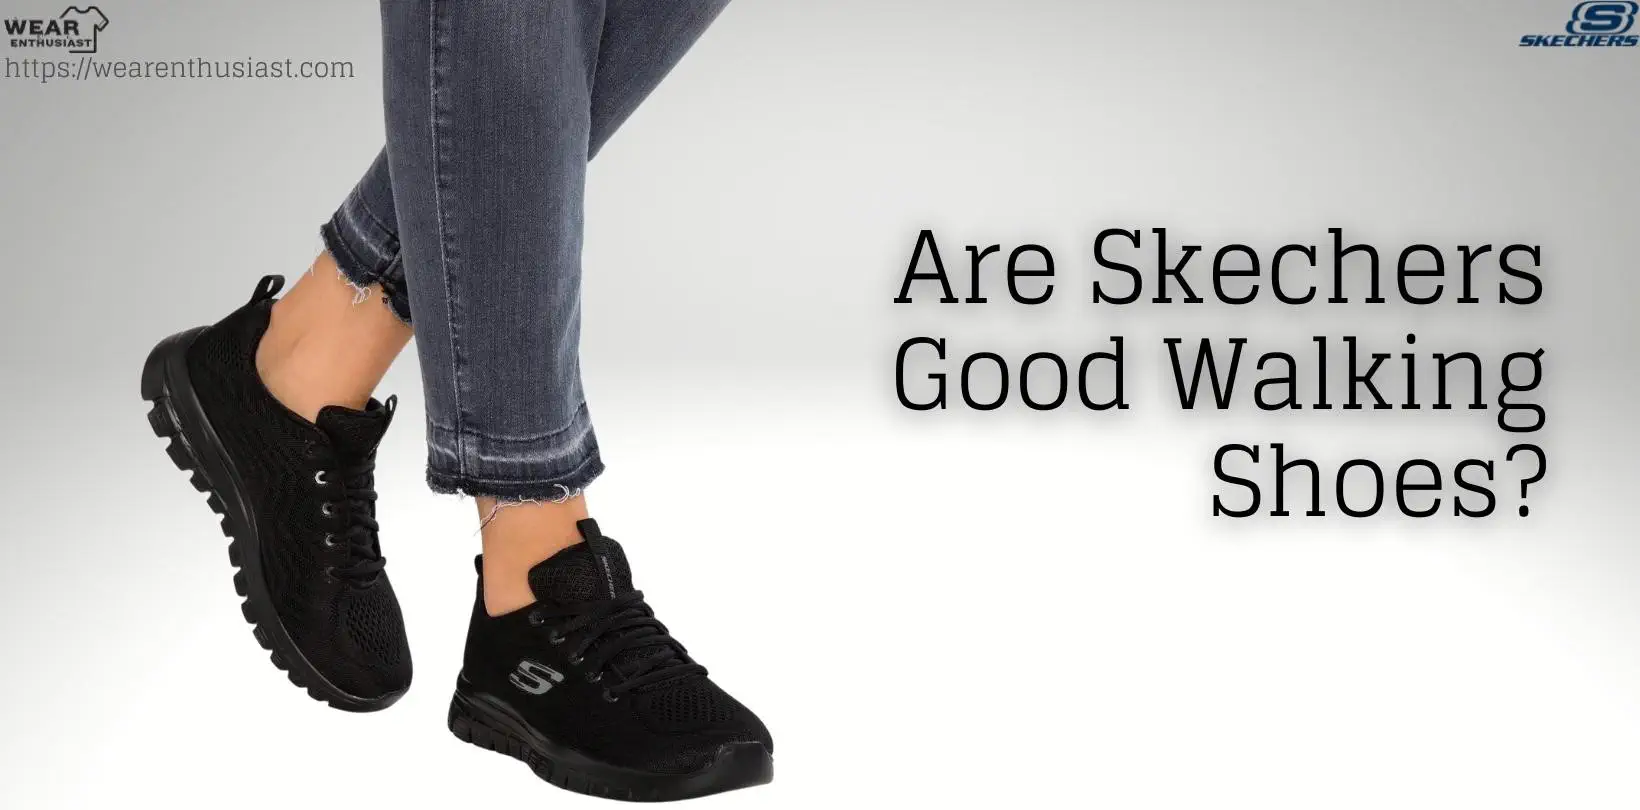 Are Skechers good walking shoes?